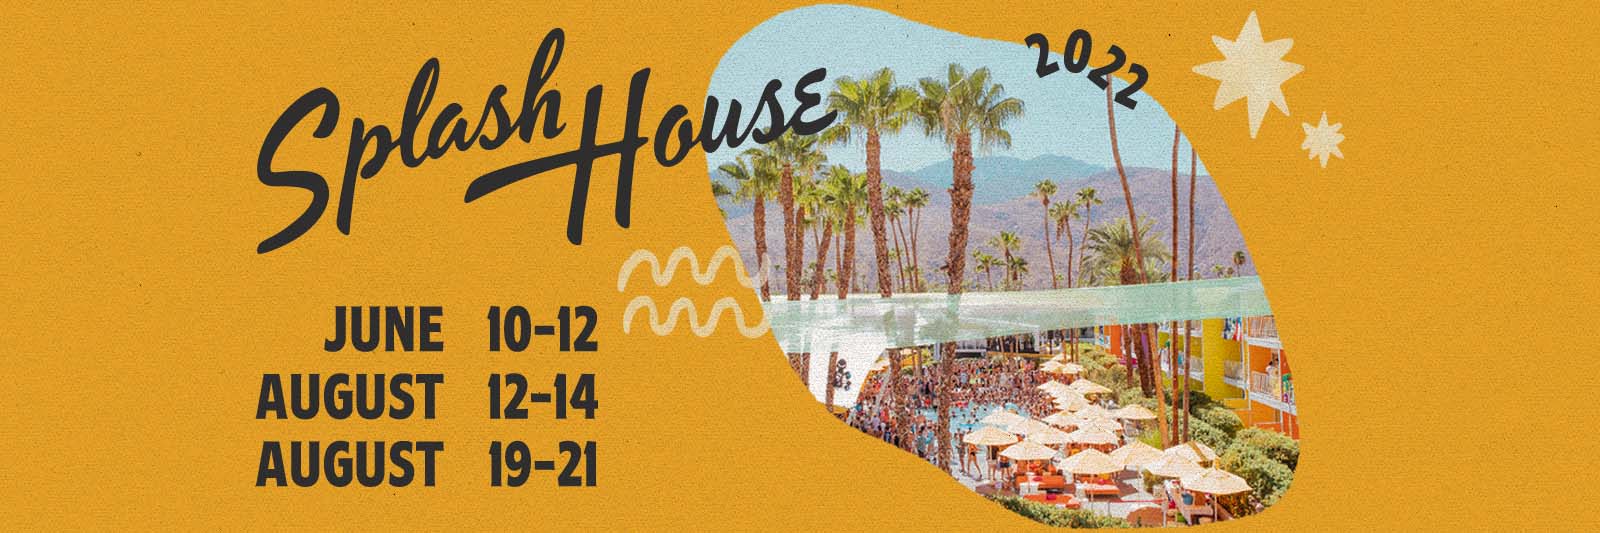 Splash House Hosts Three Festival Weekends This Summer At Multiple Palm Springs Resorts 